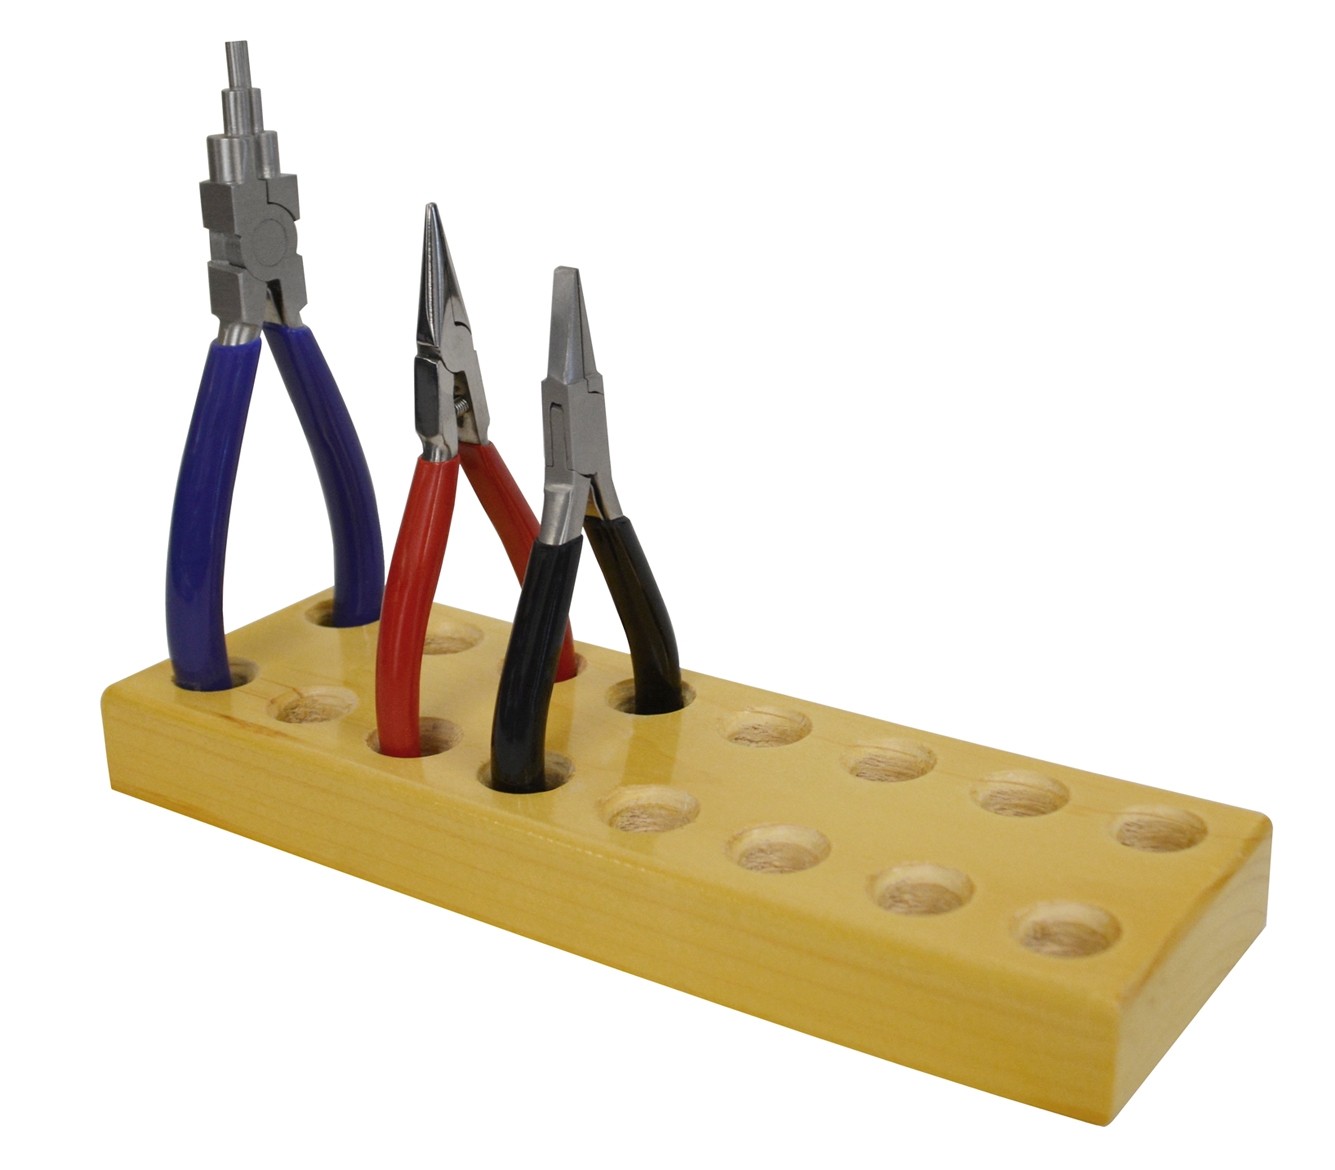 Solid Wood Plier Rack and Holder for 8 Pliers